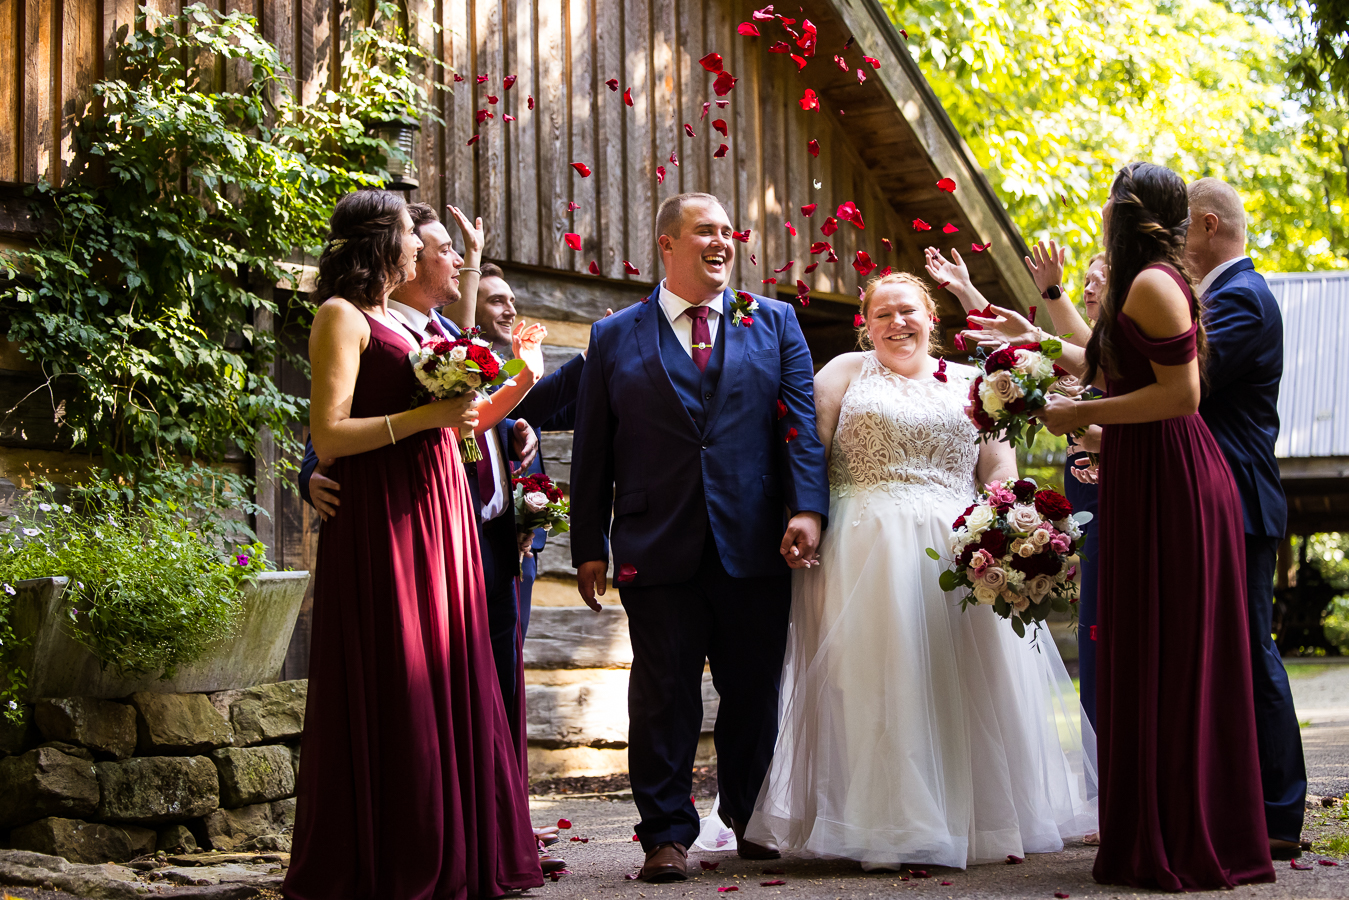 fun, colorful, vibrant image of the bride and groom as they walk between their bridal party as they throw vibrant red petals while the bride and groom smile and laugh after their wedding ceremony in stahlstown pa 